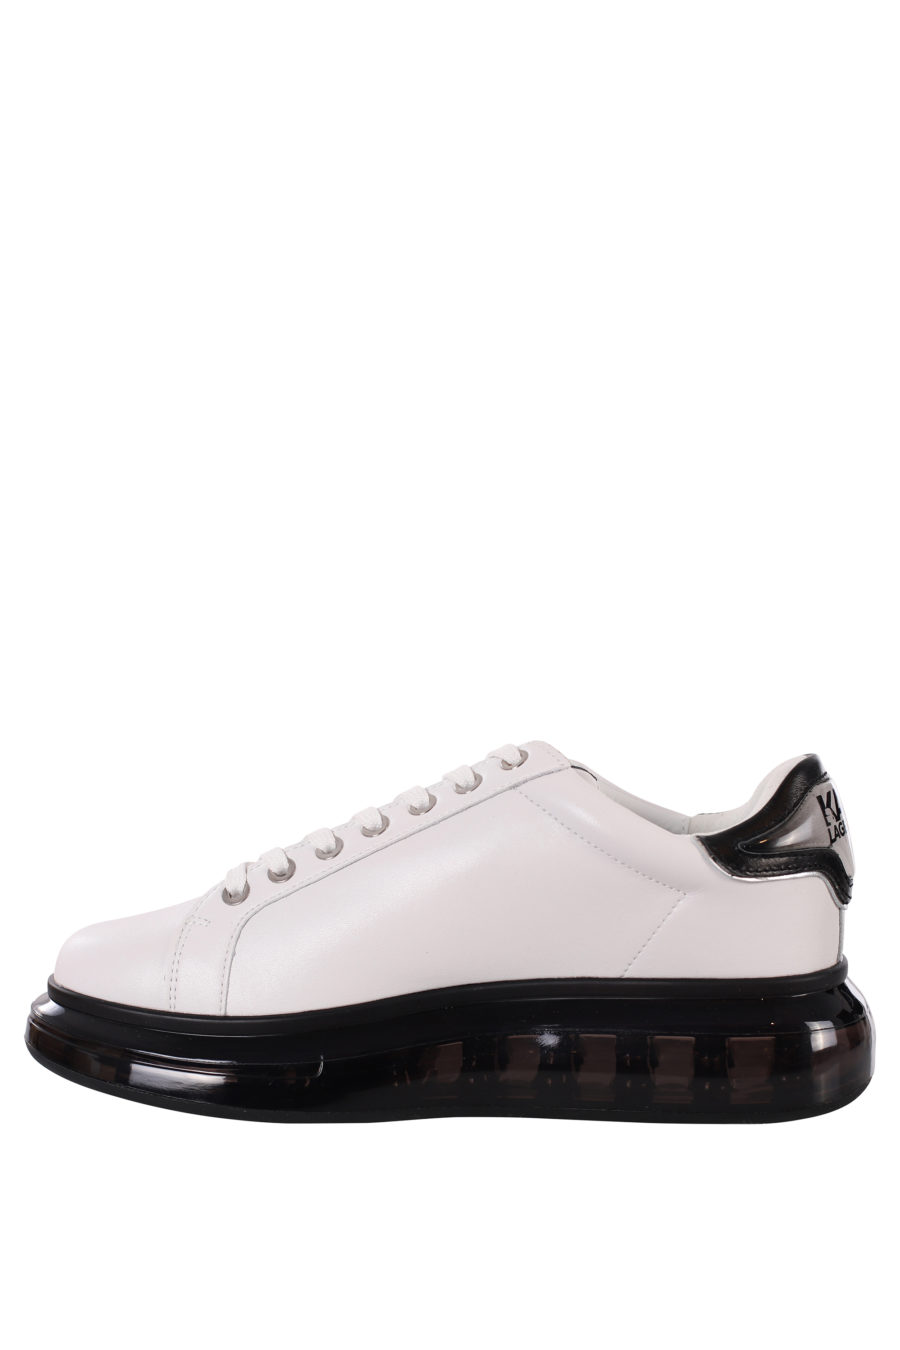 White trainers with black silhouette logo and black sole - IMG 0422